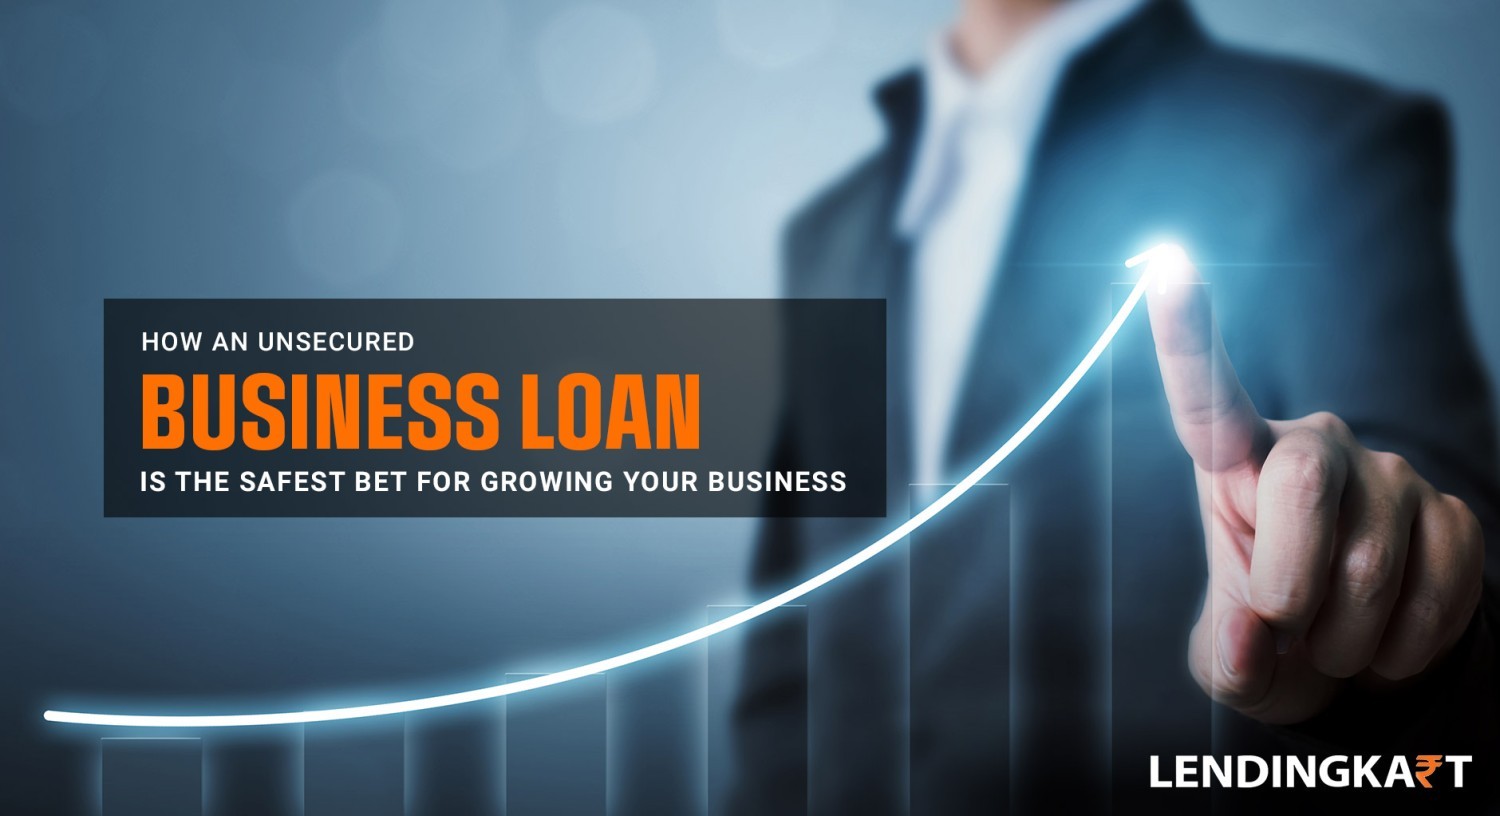 fuel-your-business-ambitions-with-our-tailored-business-loans-big-4